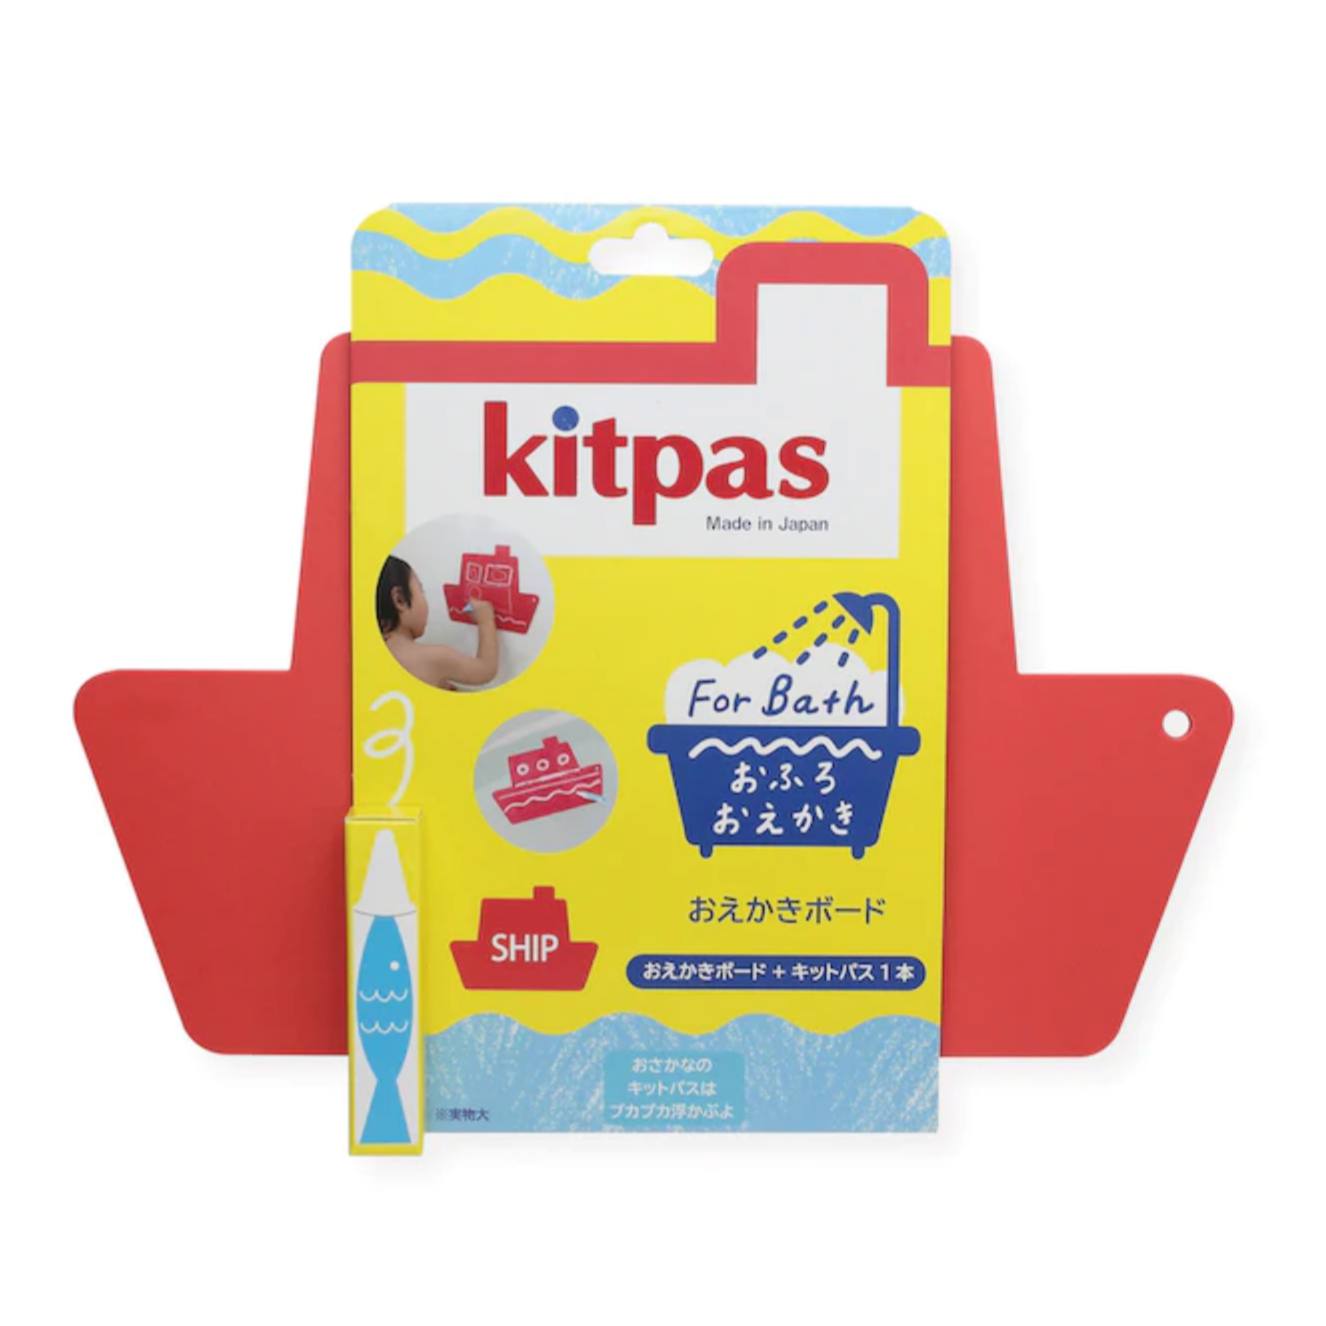 Kitpas for Bath (Drawing board set) with Ship board